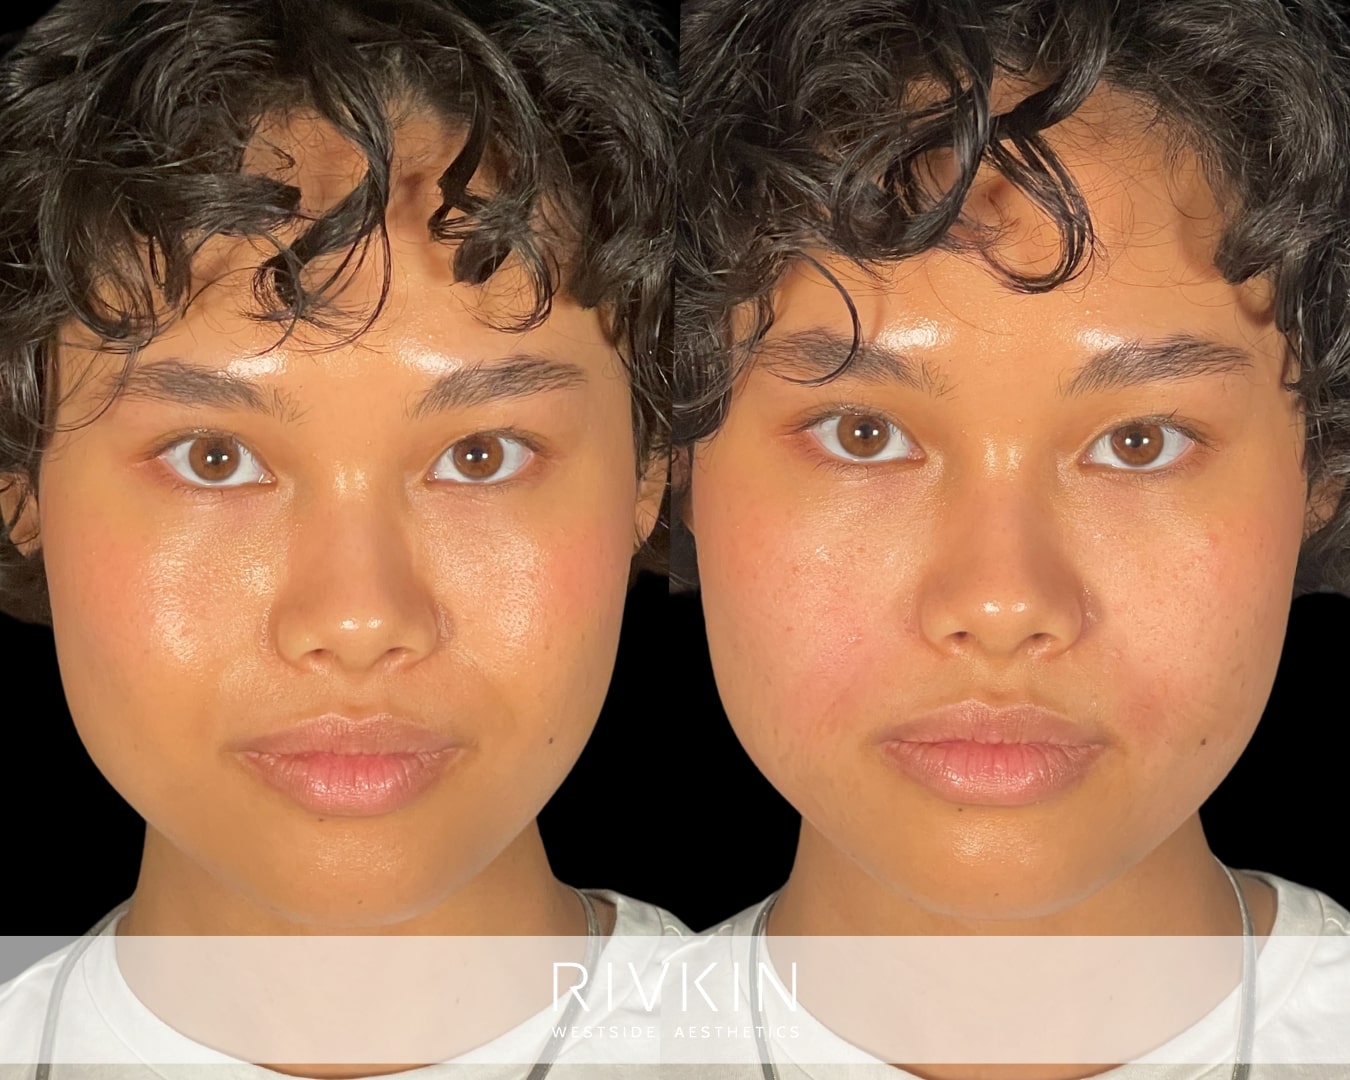 This young patient was bothered by her nasolabial folds, and Nurse Practitioner Presile addressed this with filler injections. She used a very conservative amount of filler to ensure the patient's lower face retained a natural appearance.